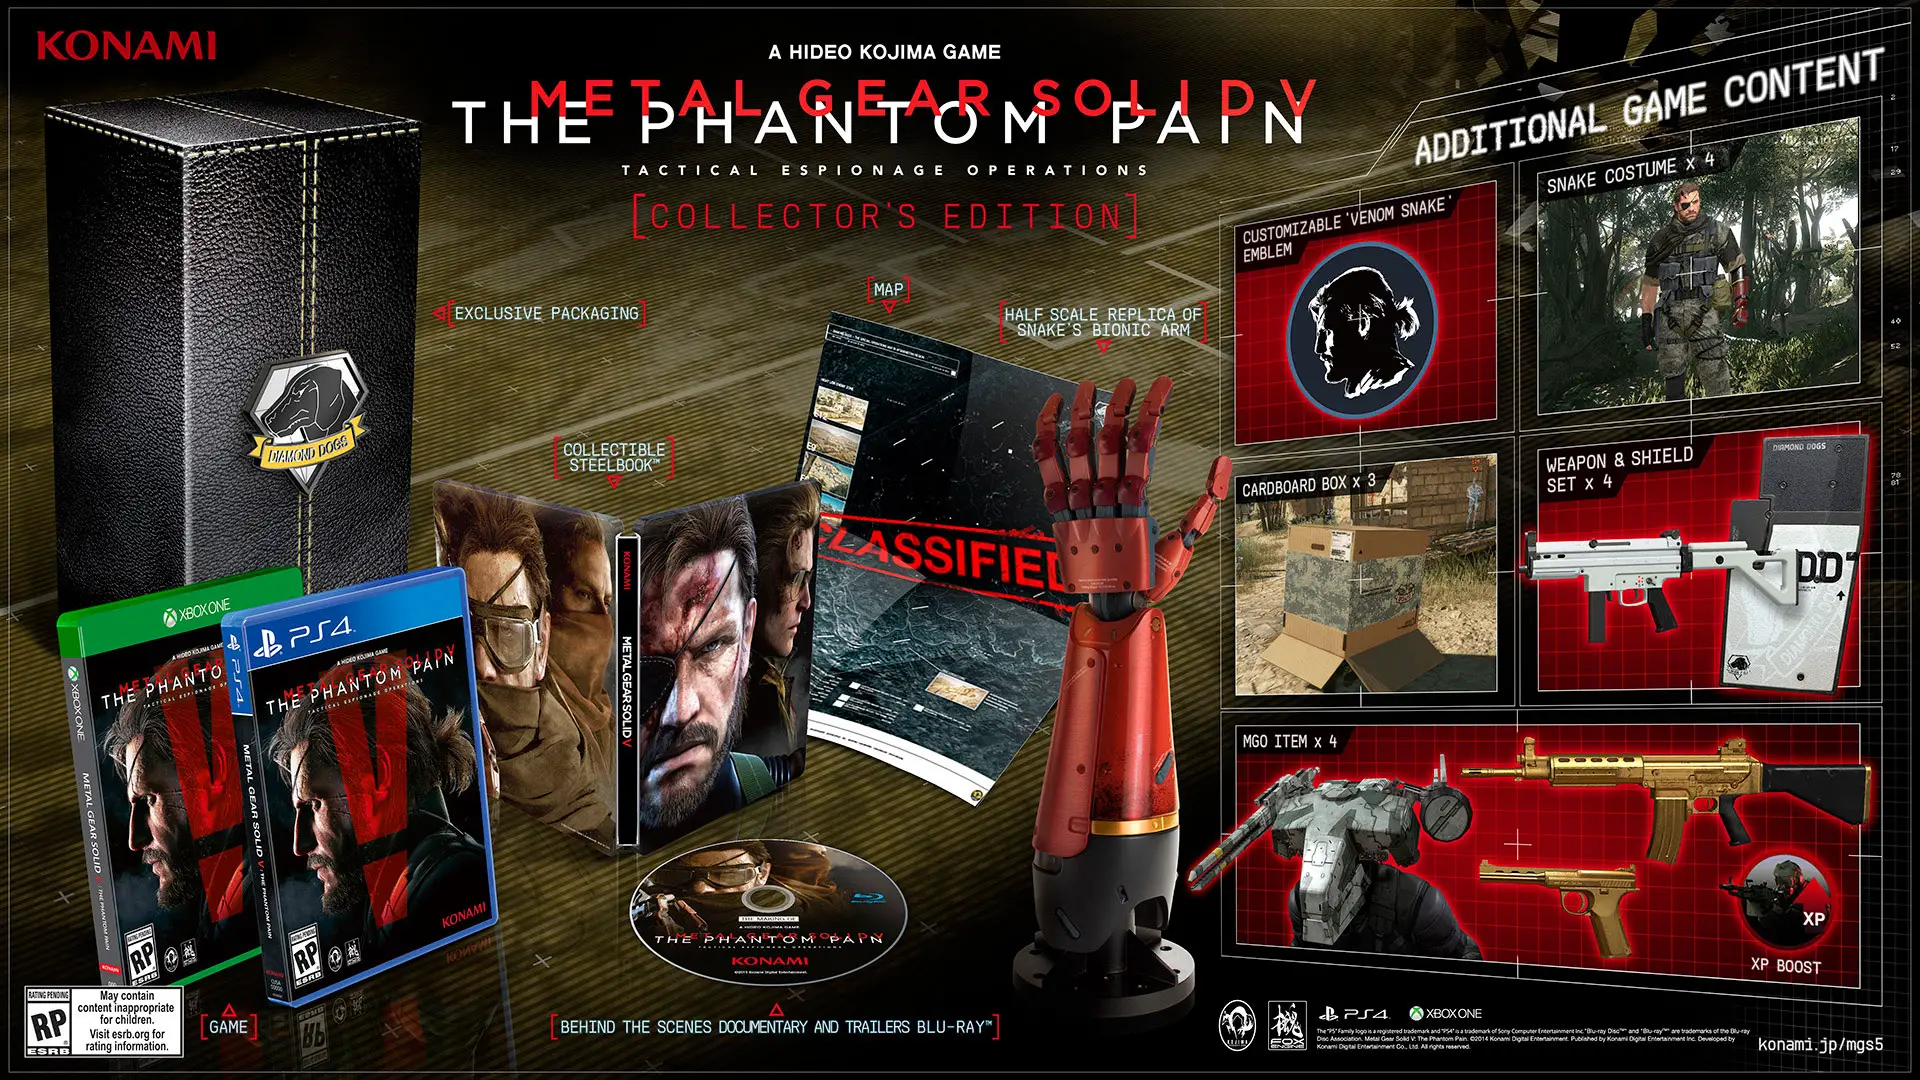 Metal-Gear-Solid-V-The-Phantom-Pain-Collectors-Edition